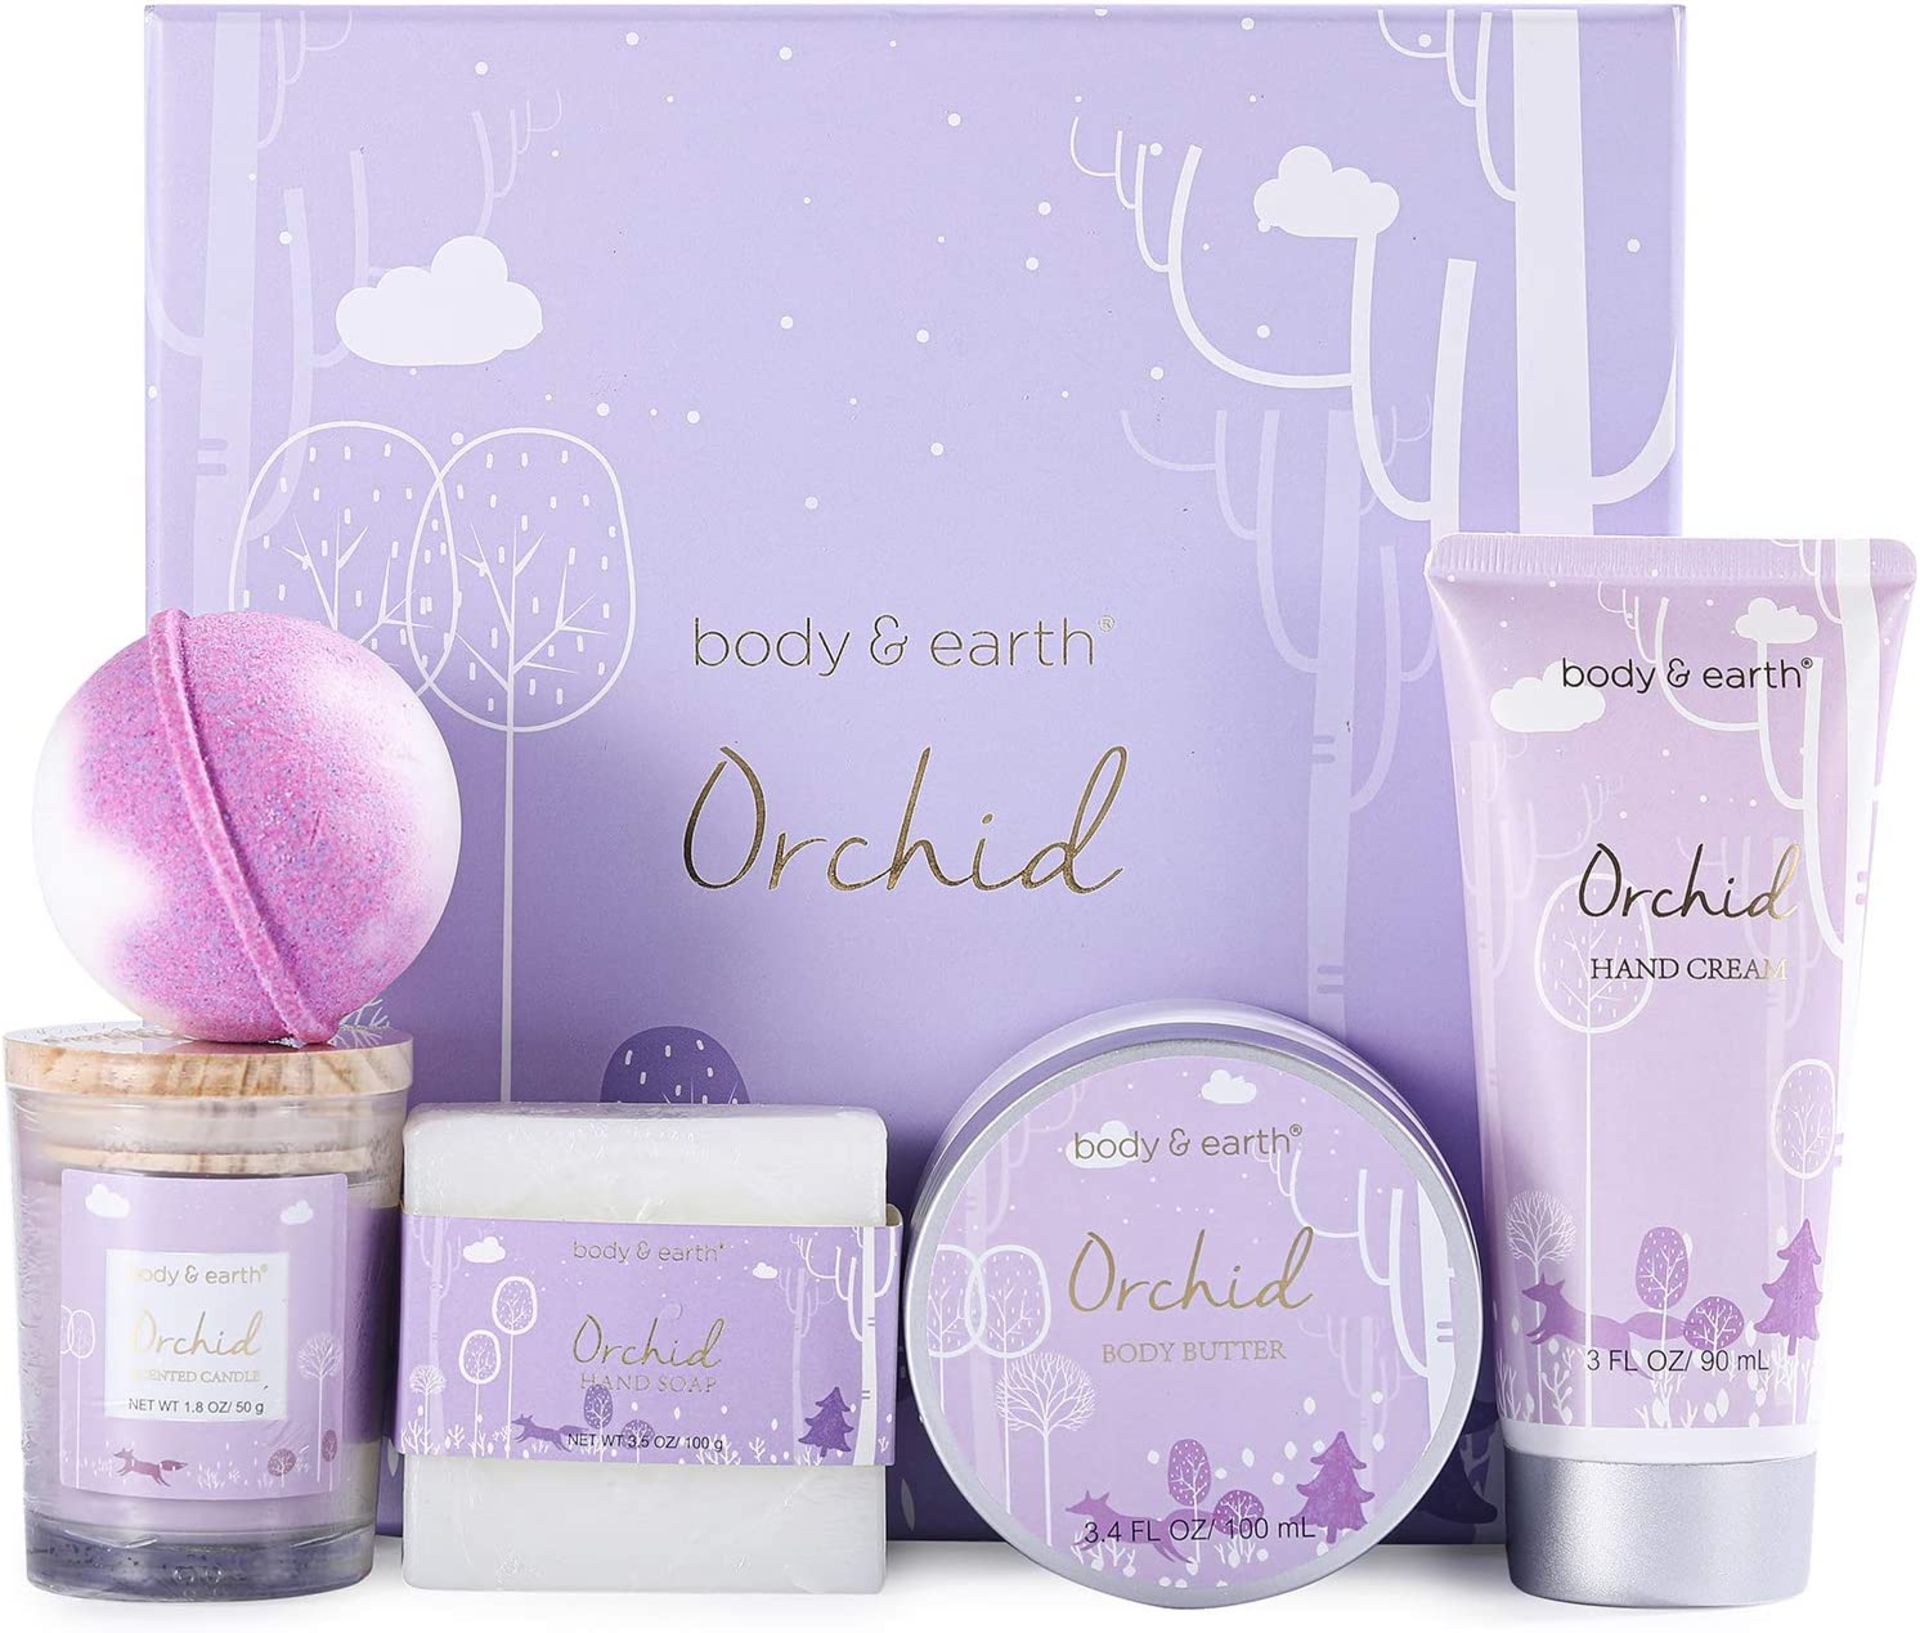 PALLET TO CONTAIN 48 X New Packaged Body & Earth Orchid Bath Gift Set. (BE-BP-043) Orchid Scent: